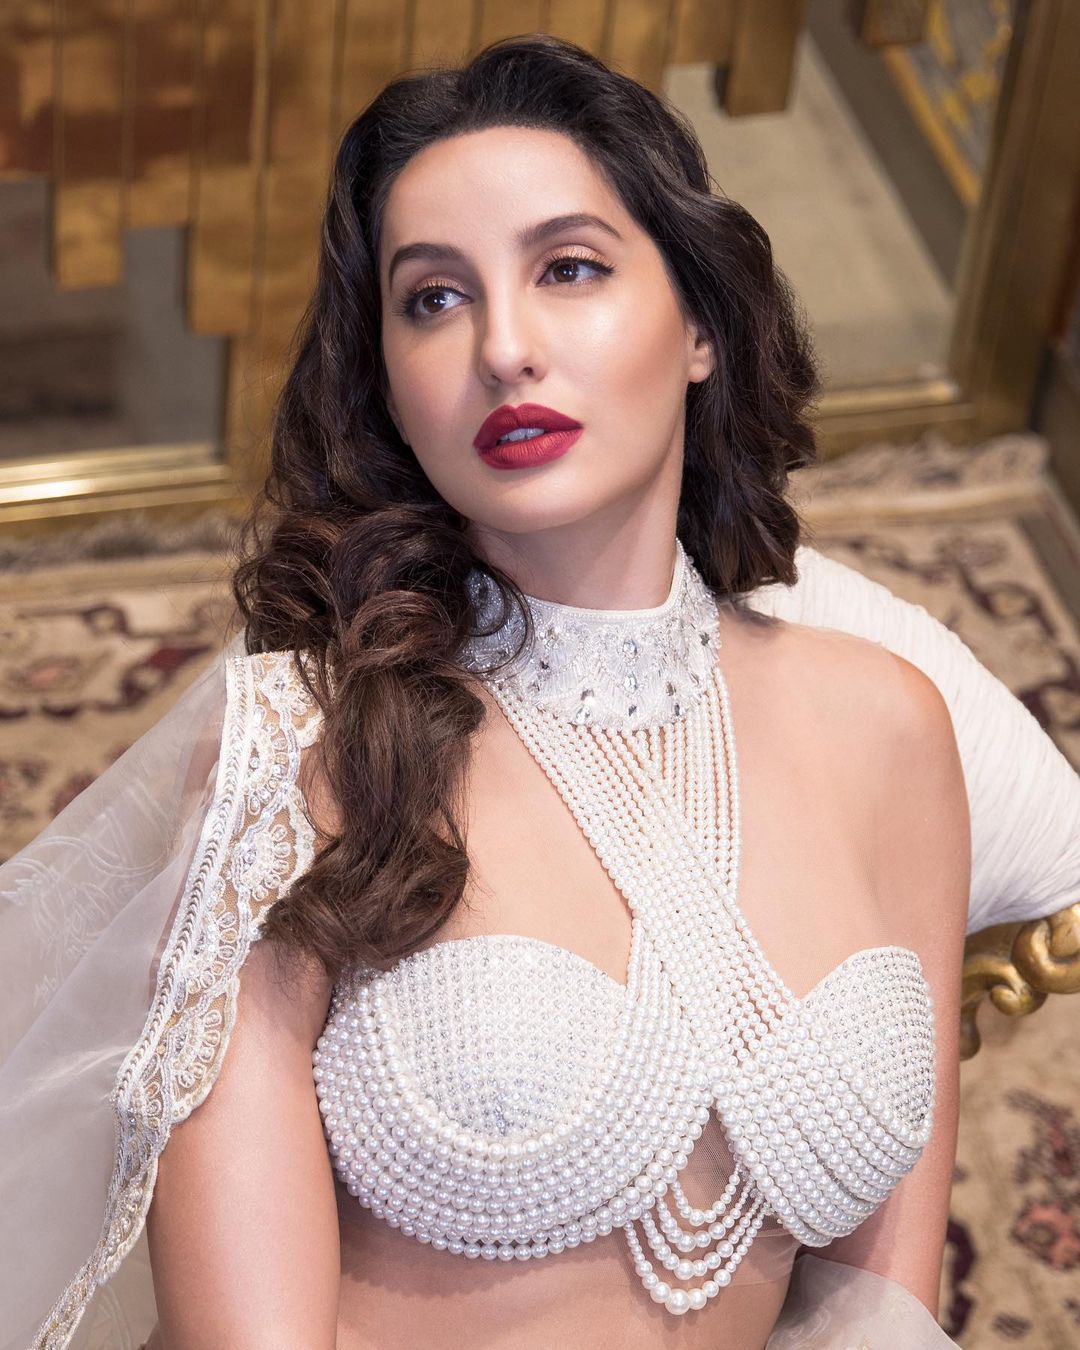  Nora Fatehi keeps it sensuous in the pearl-encrusted halter-style blouse. (Image: Instagram)